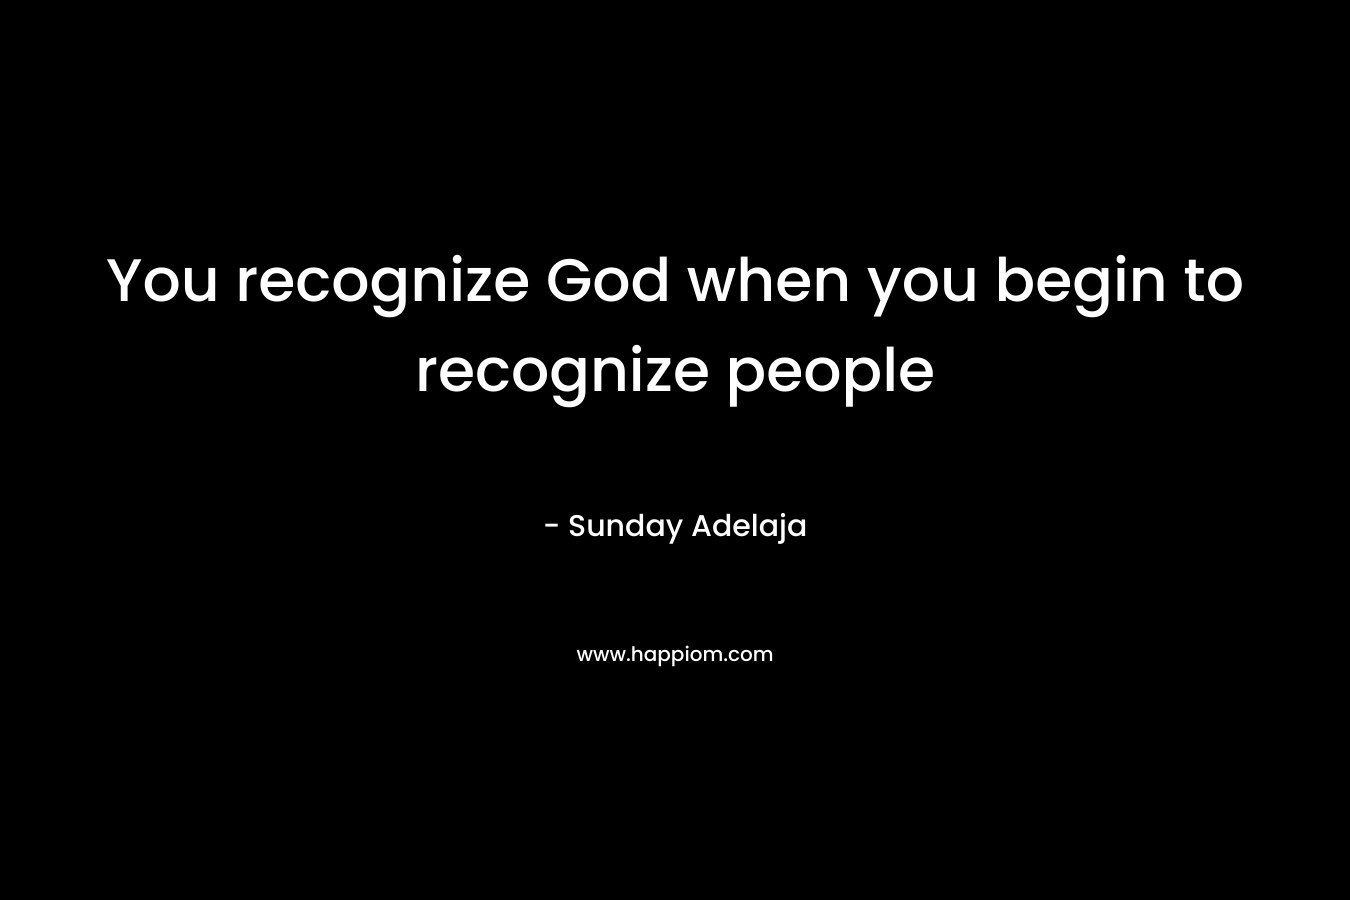 You recognize God when you begin to recognize people